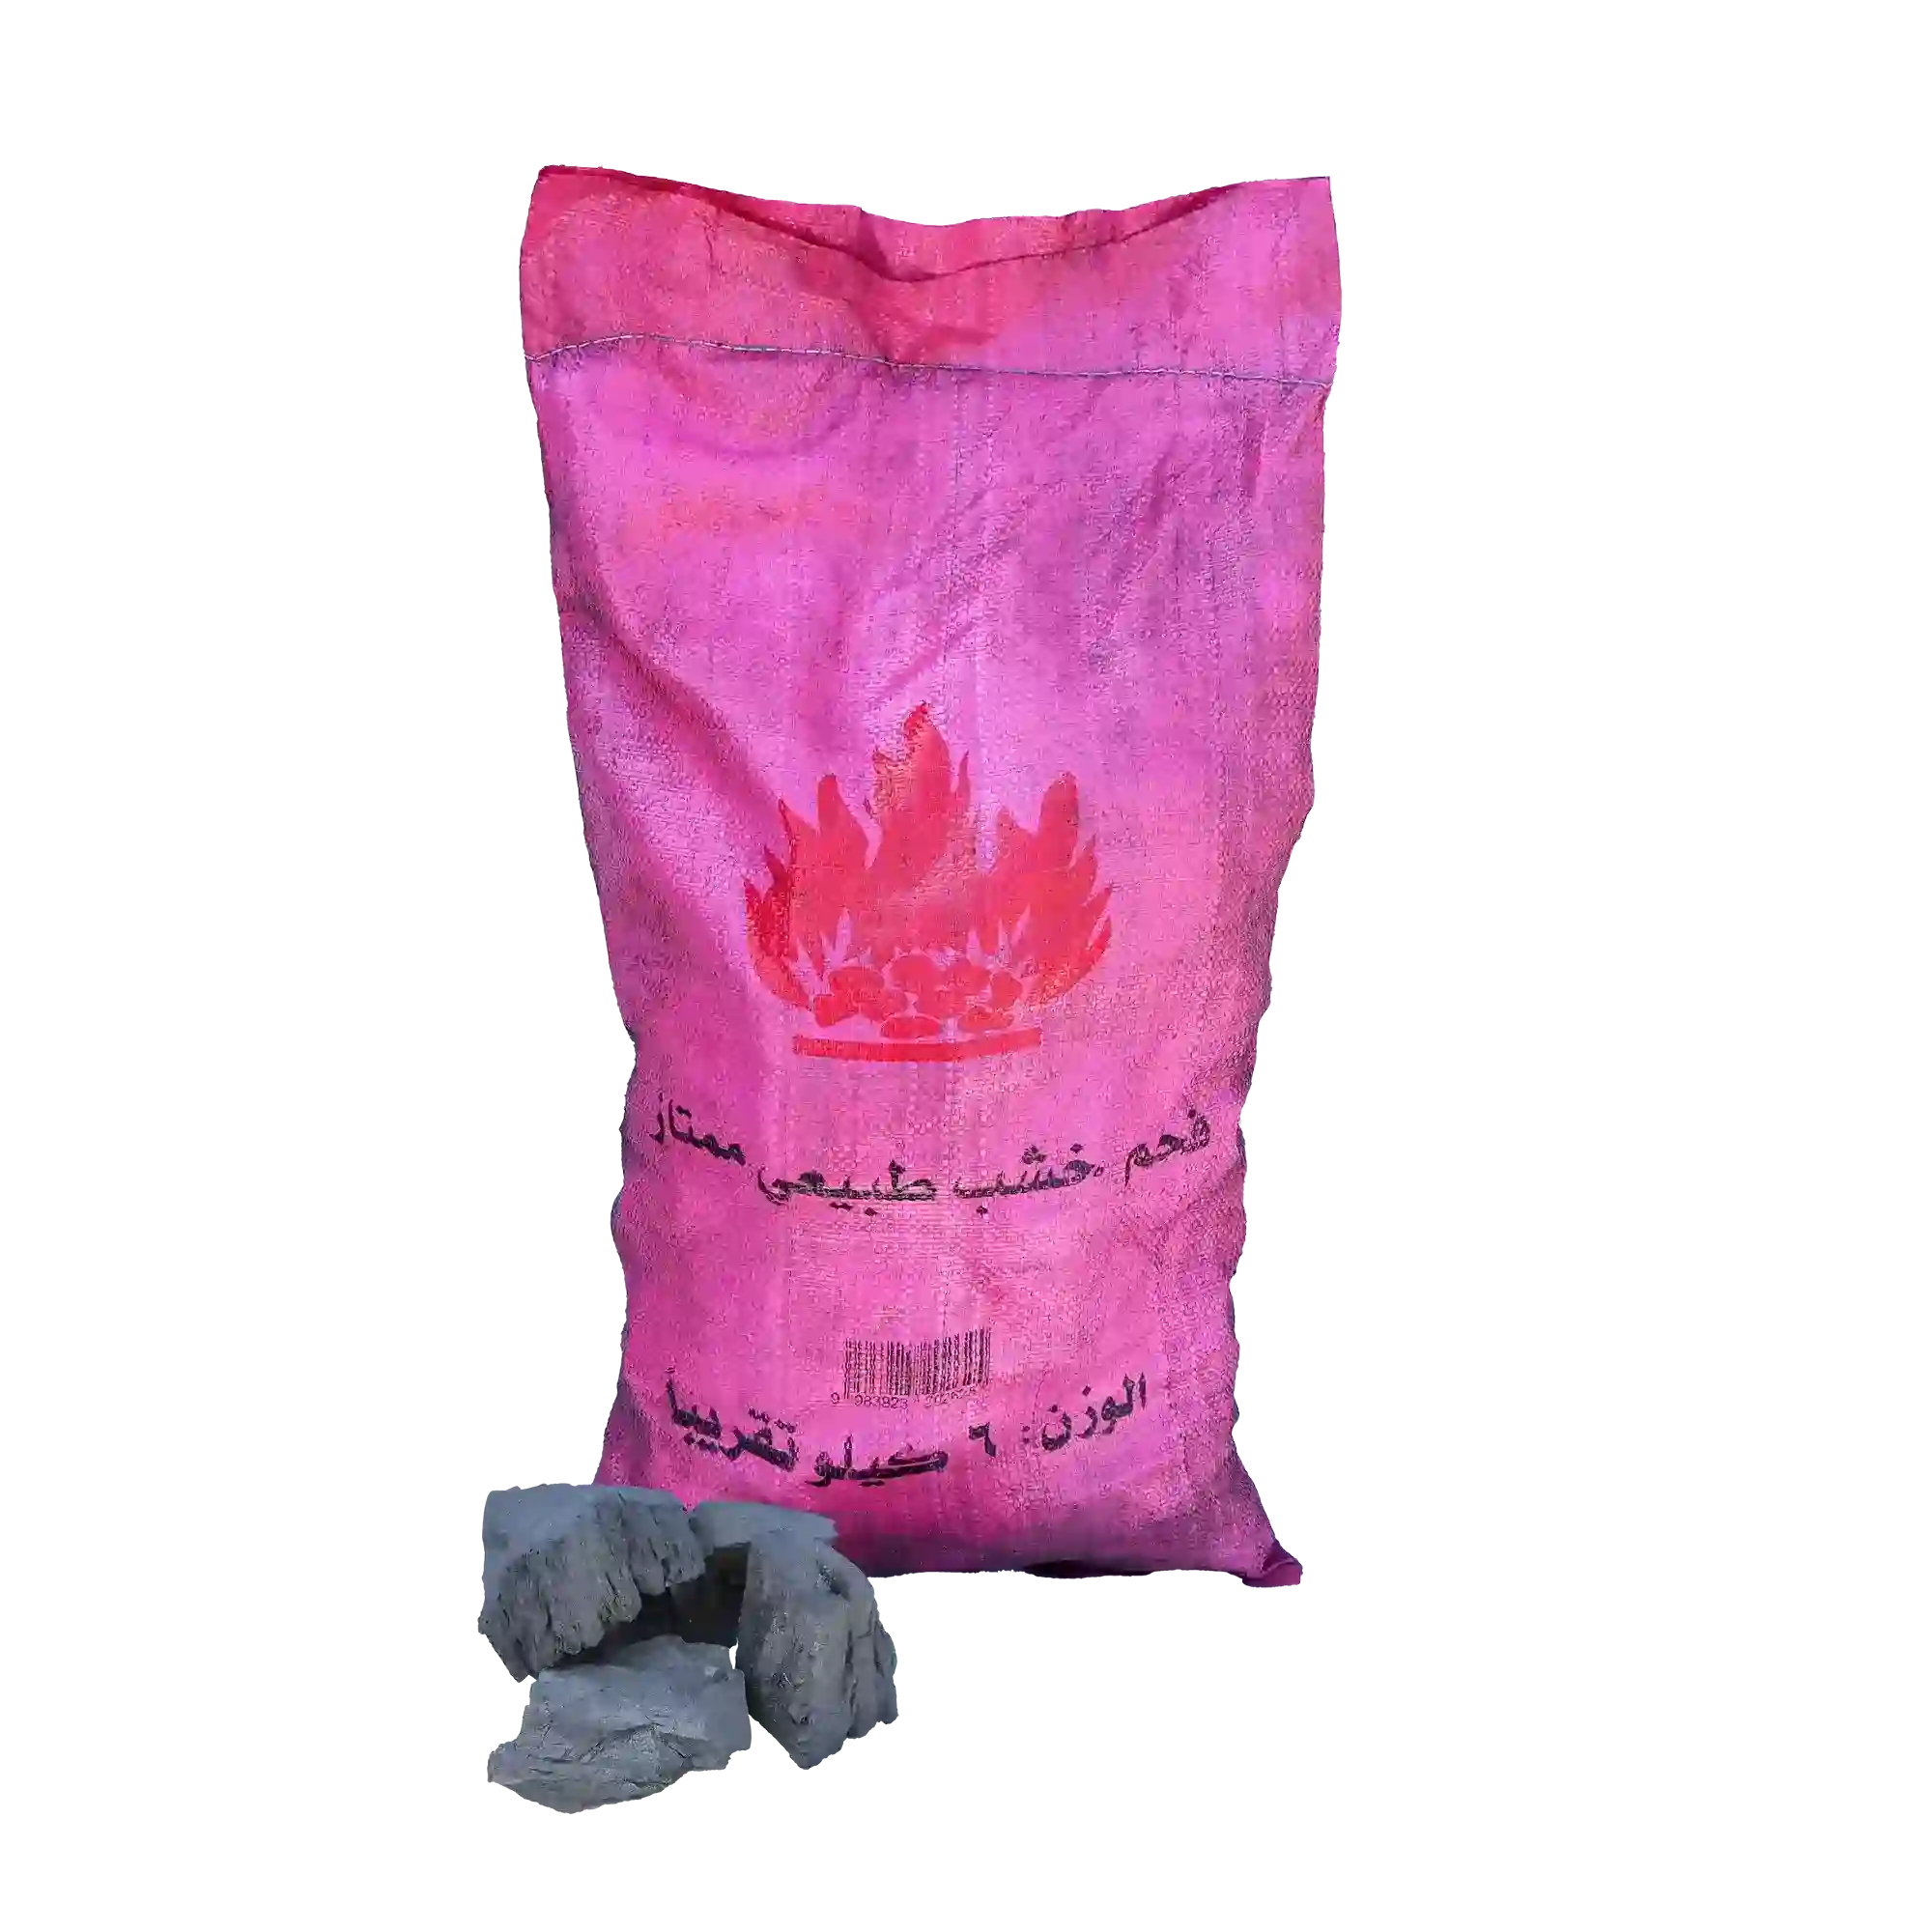 KAC -African charcoal (grilled) - 6 kg